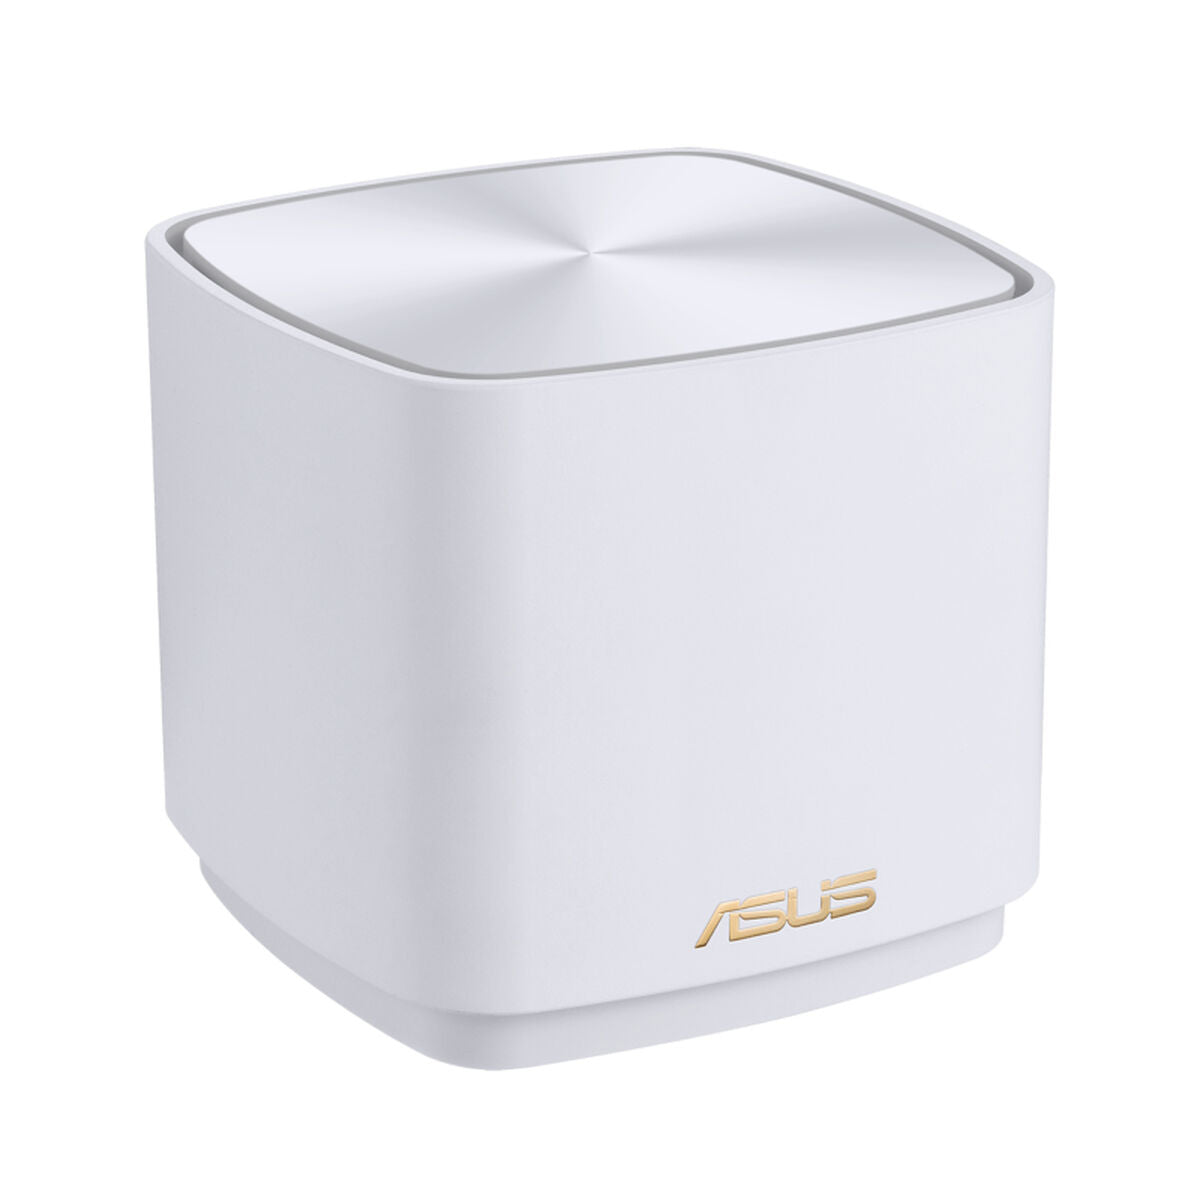 Access point Asus-1